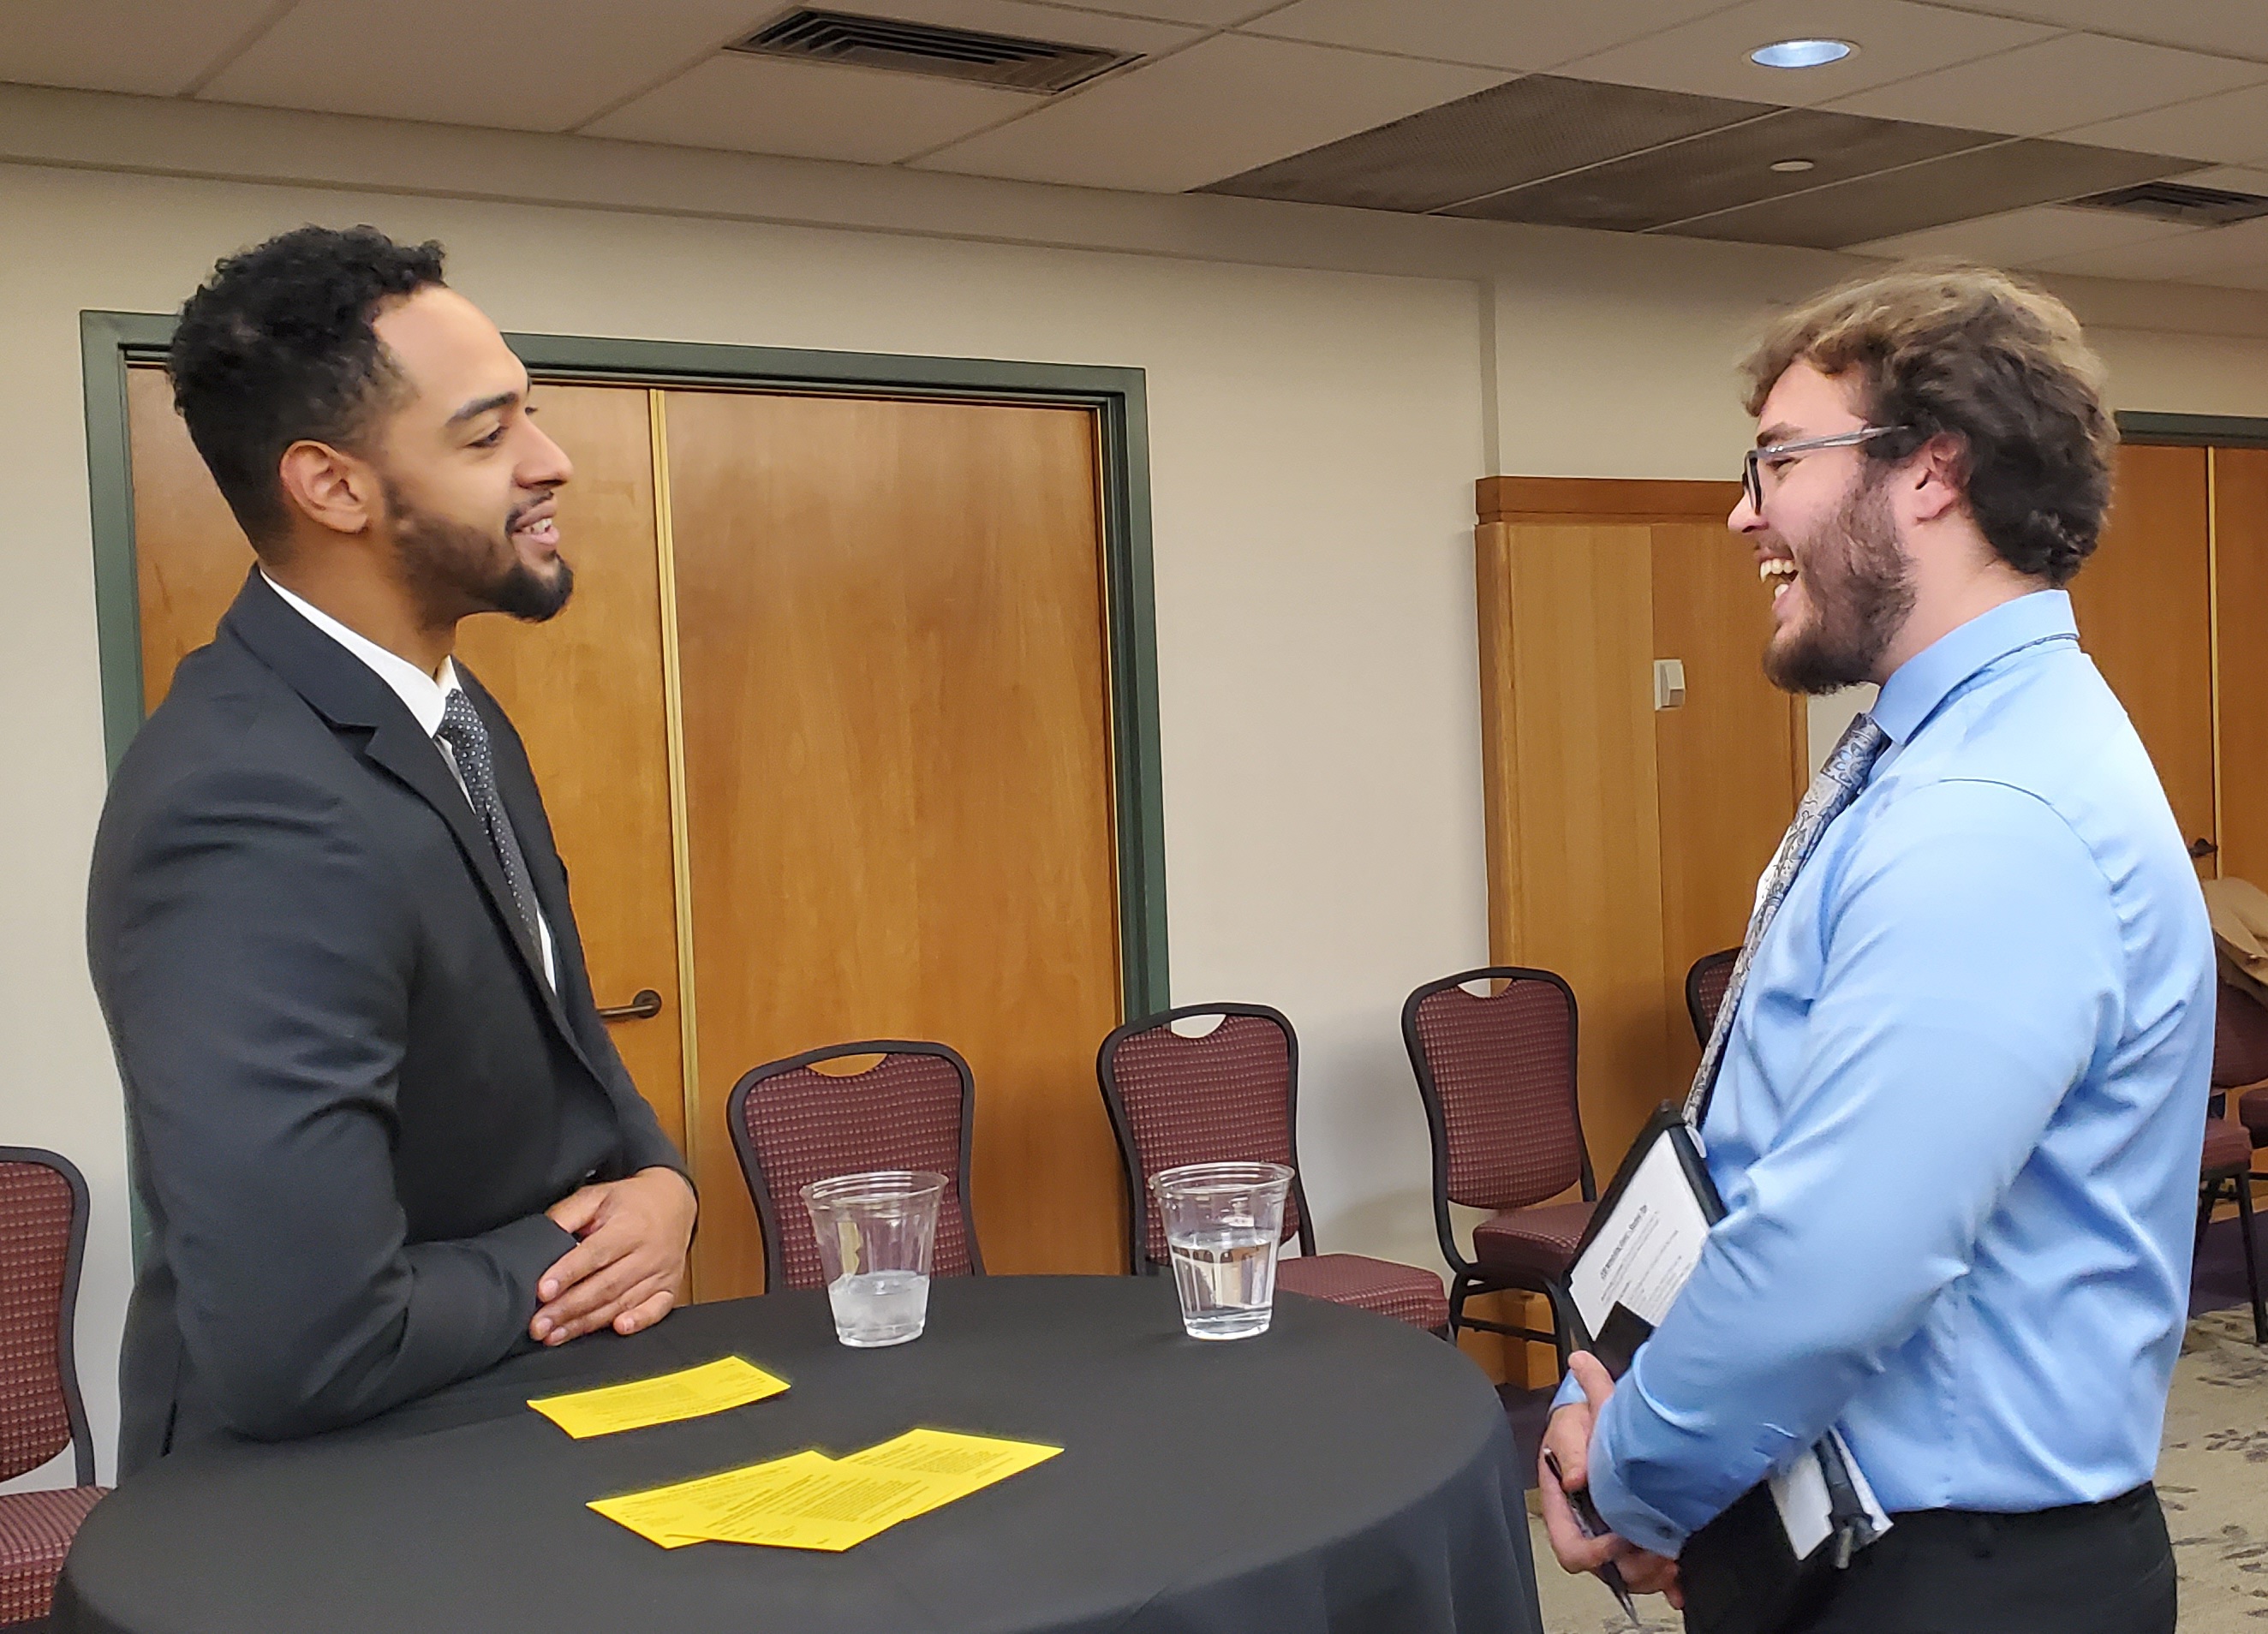 Student and recruiter smiling and talking to each other across a small circular table 